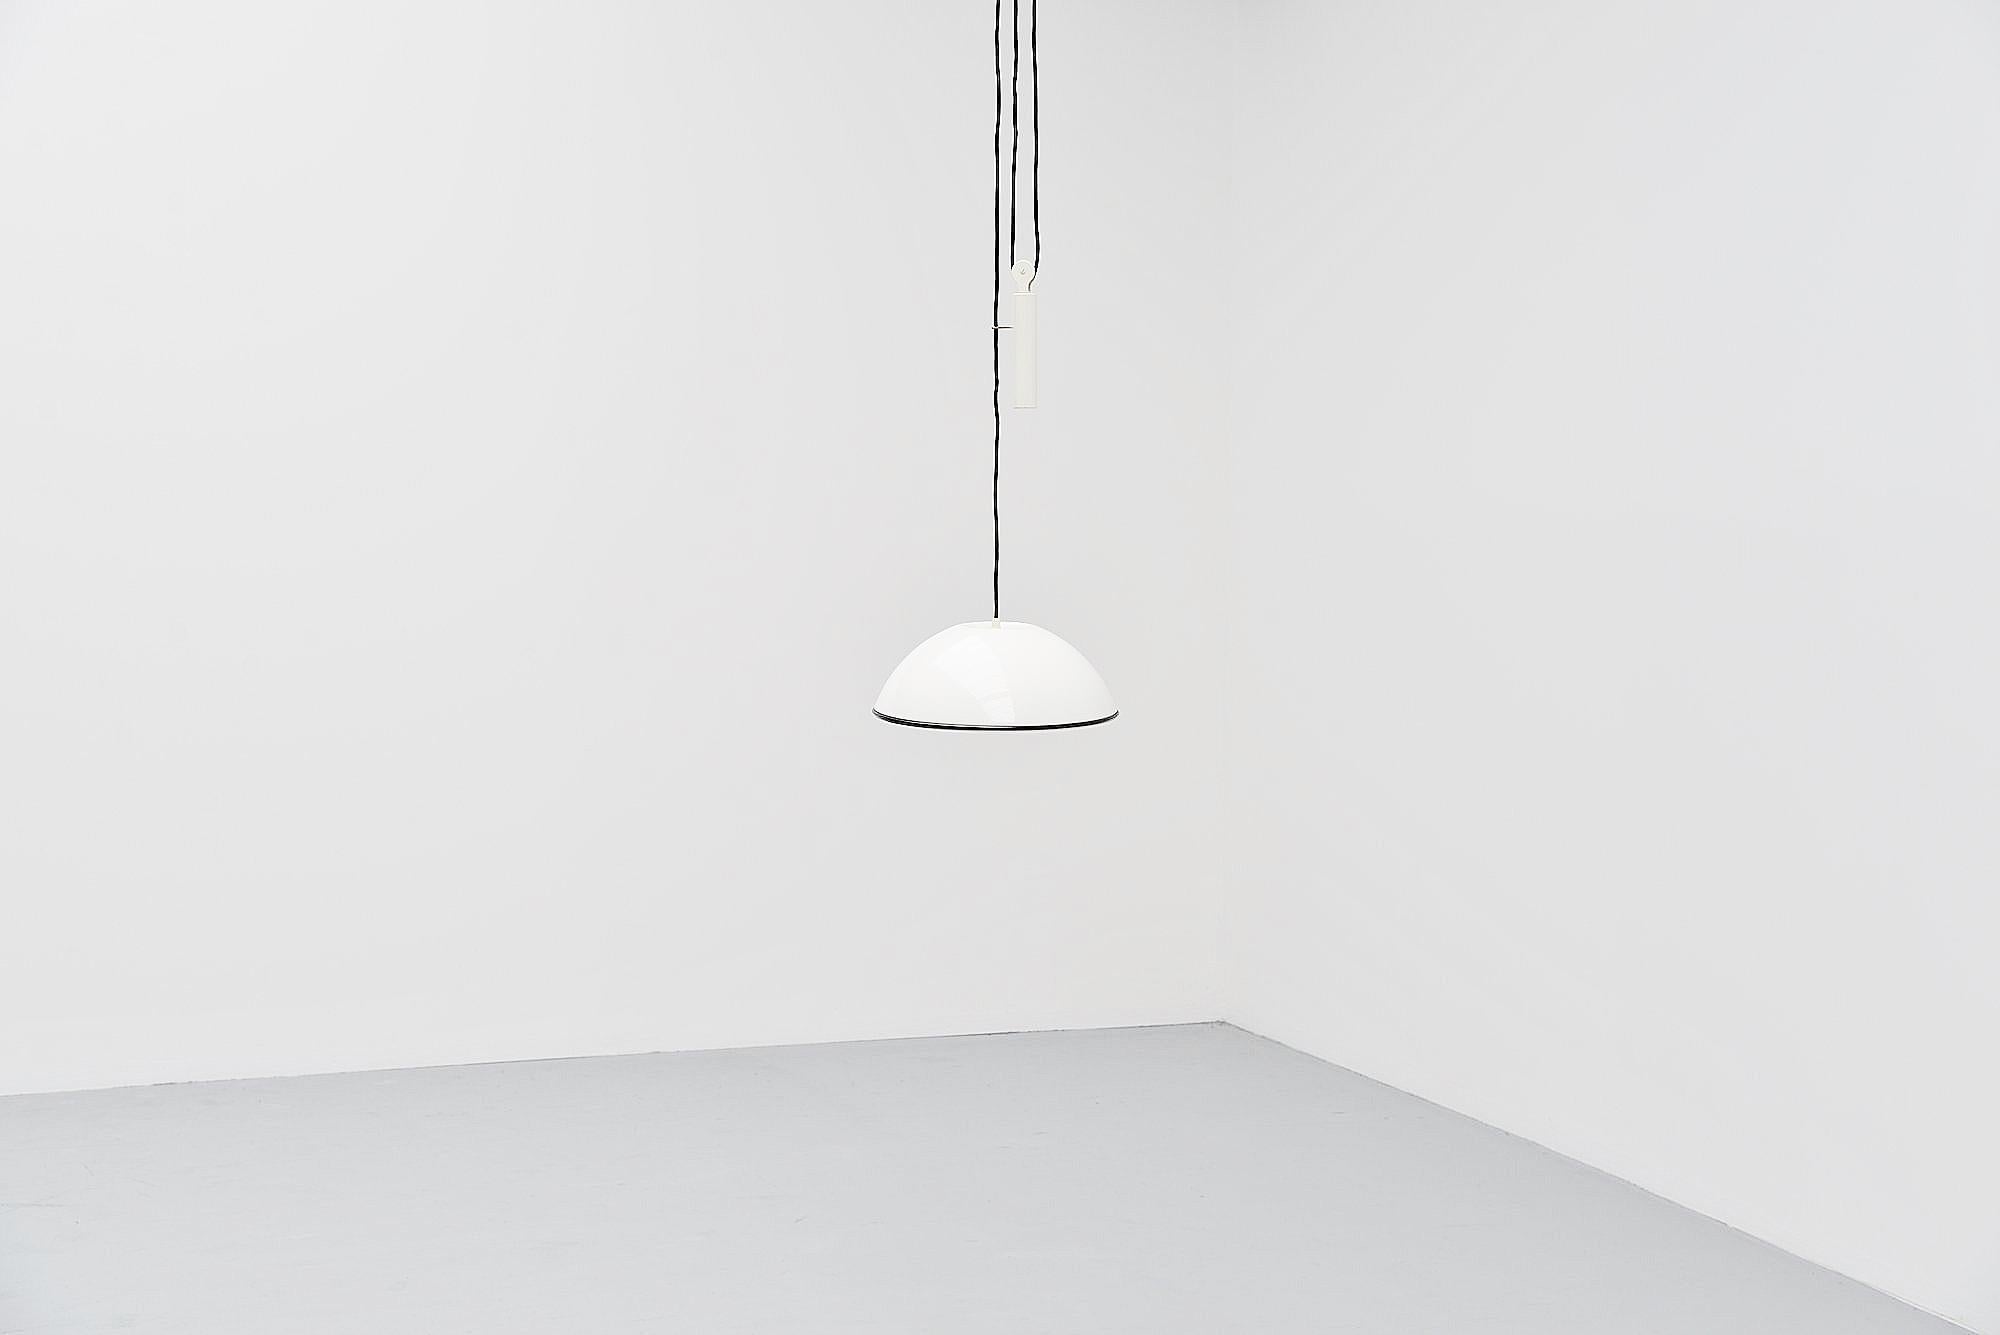 Counter balance pendant lamp model Relemme designed by Achille and Pier Giacomo Castiglioni, manufactured by Flos, Italy, 1962. This lamp has an ingenious and easy balance system to adjust the lamp in height. The lamp is lacquered in white and is in